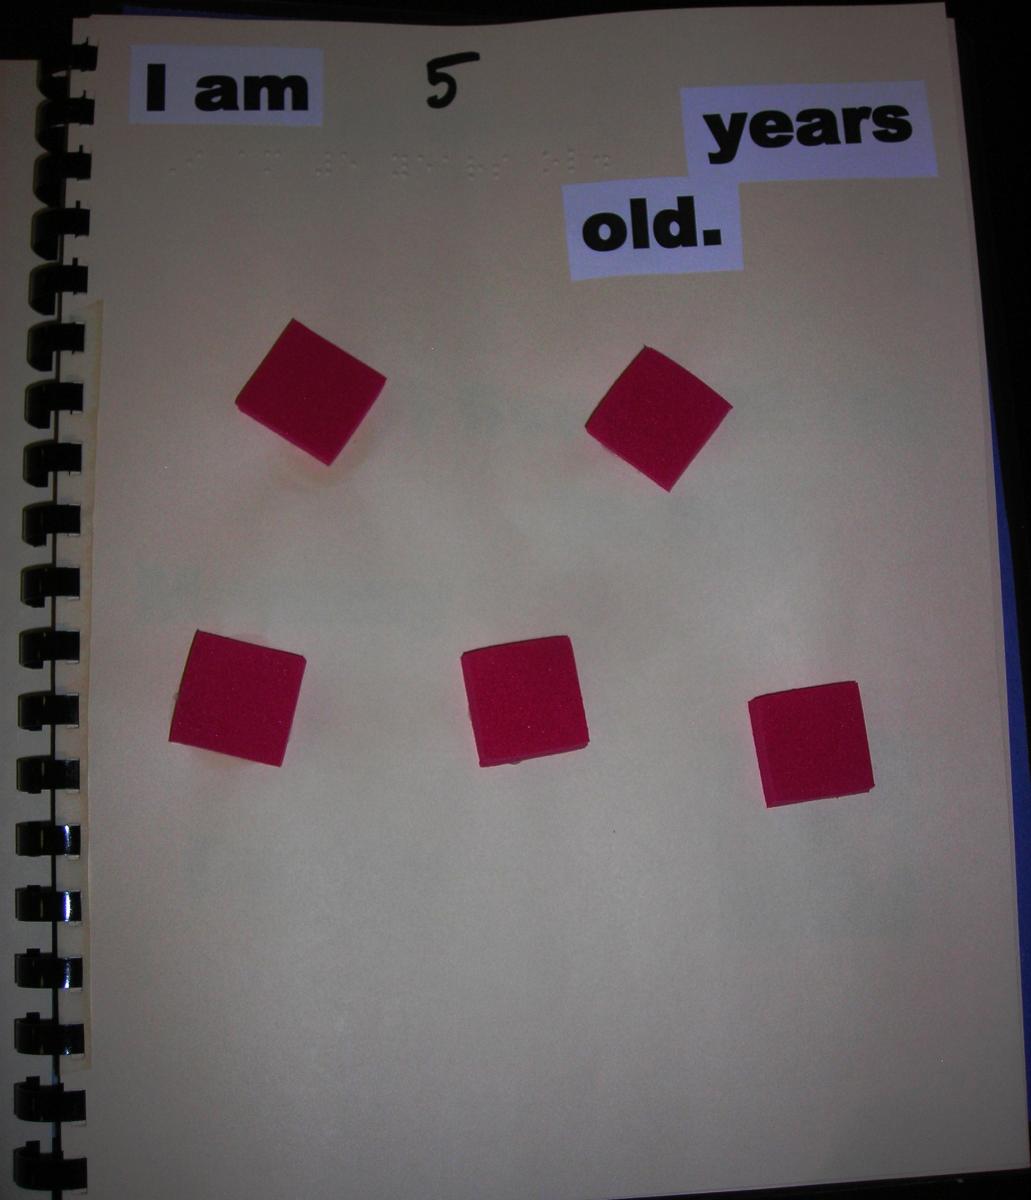 Page about being 5 years old